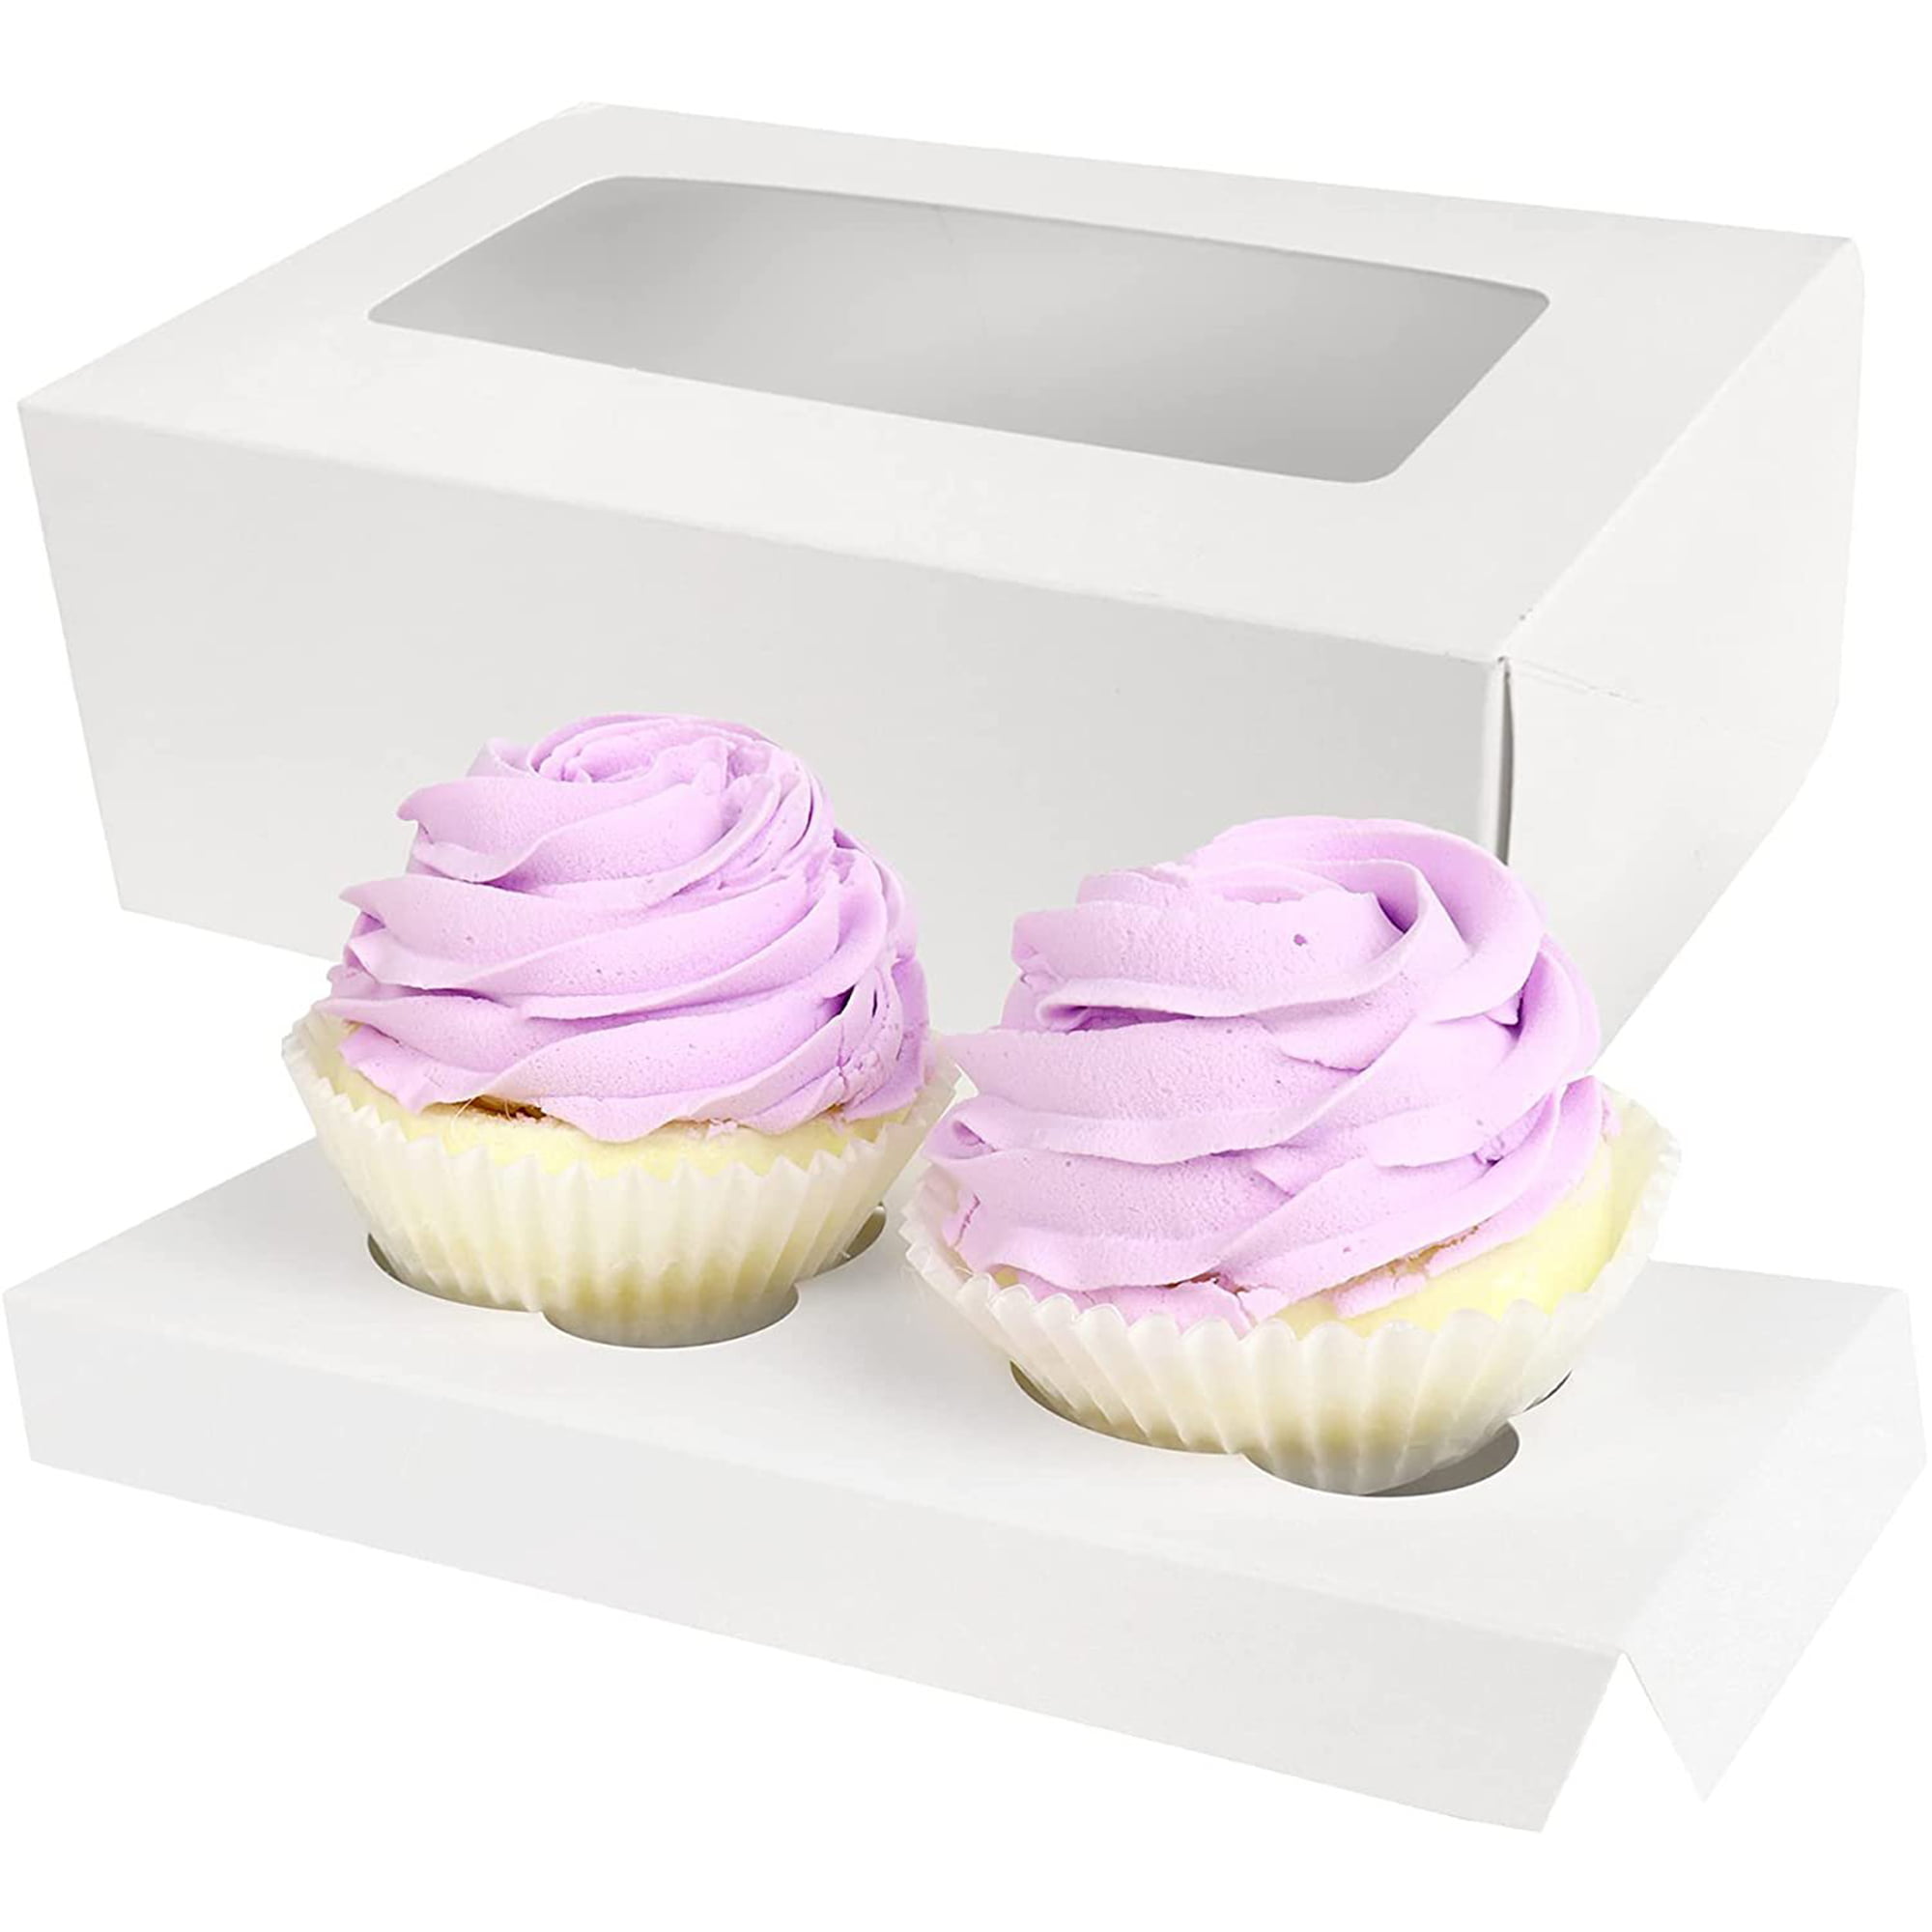 PREMIUM PINK WINDOWED CUPCAKE BOXES 1 2 4 6 9 12 & 24 CUP CAKES TRAYS INSERTS 